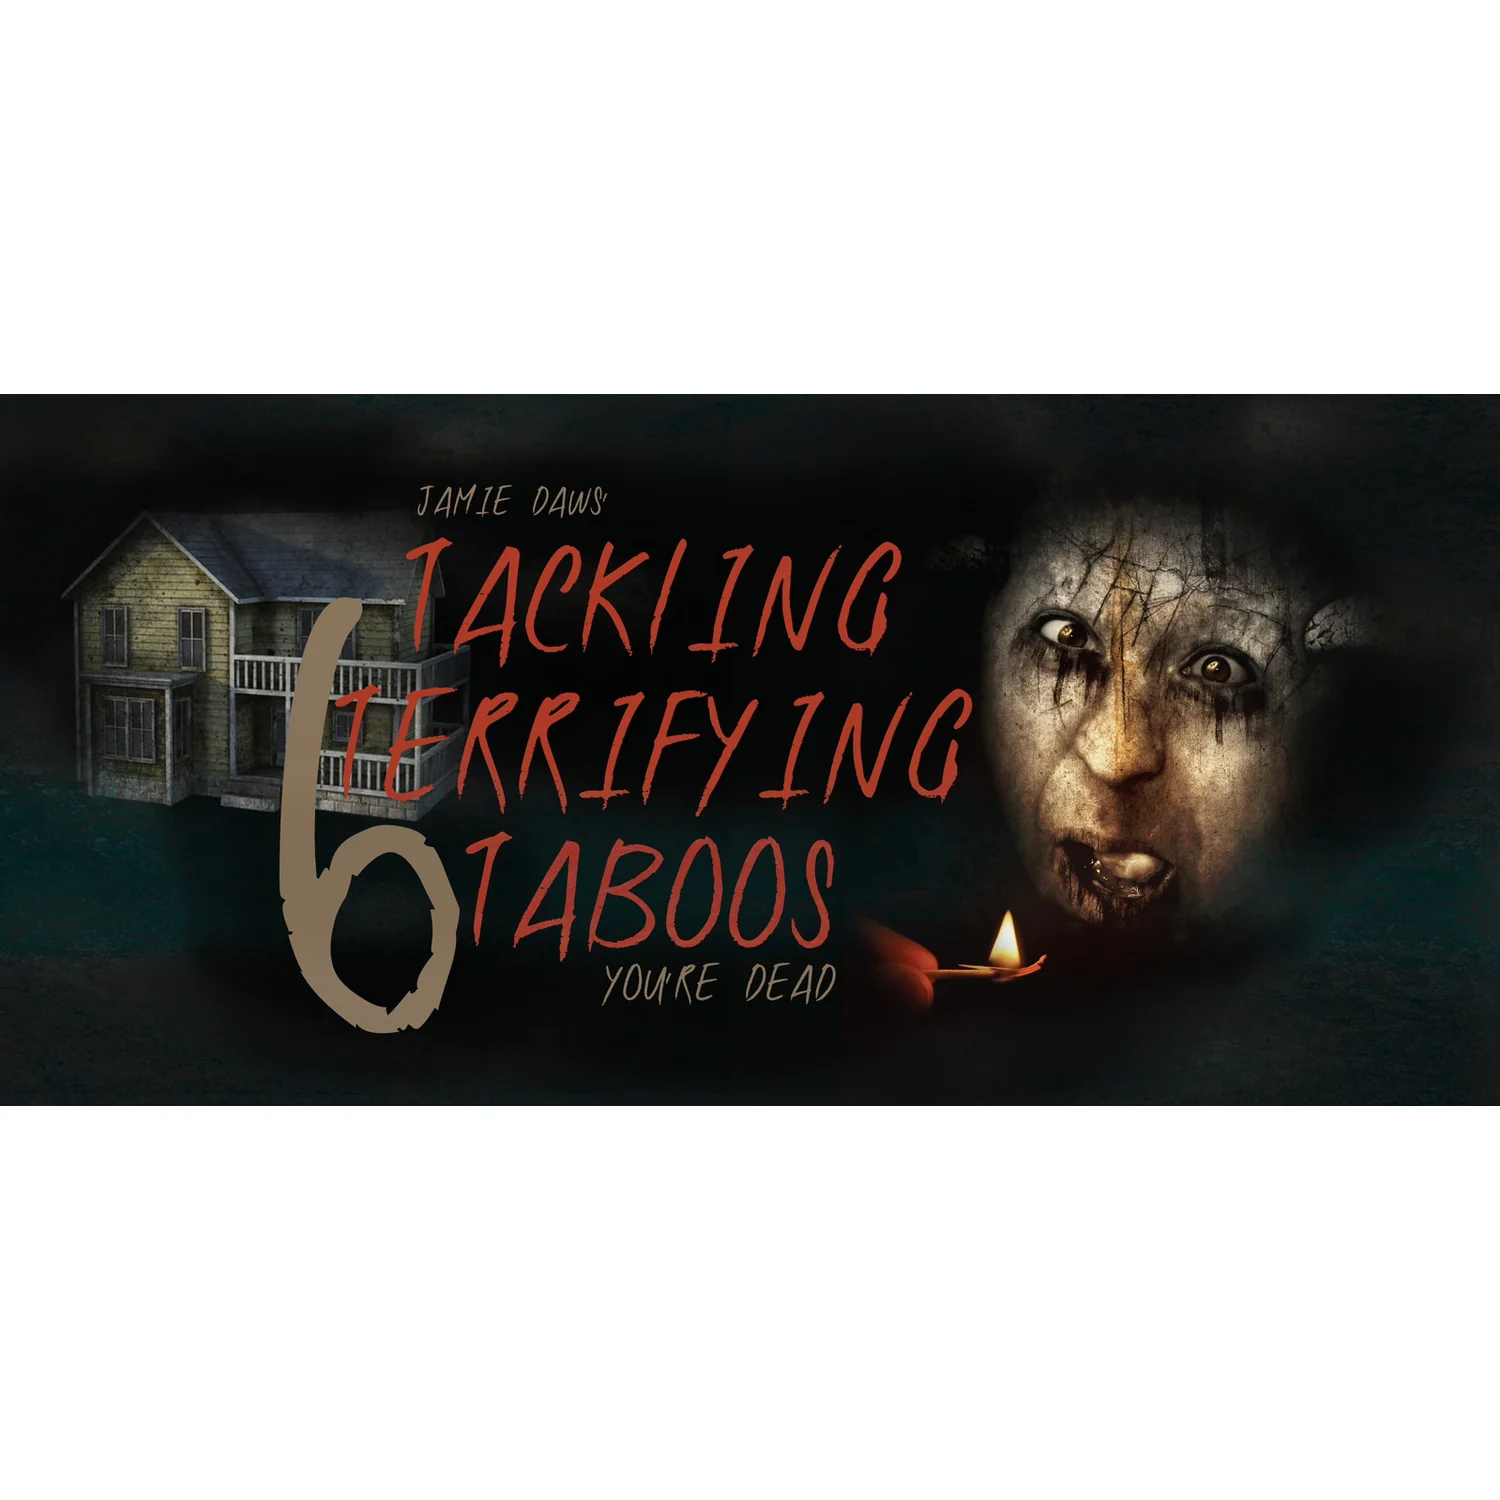 Tackling Terrifying Taboos 6 by Jamie Daws (Mp4 Video Magic Download)